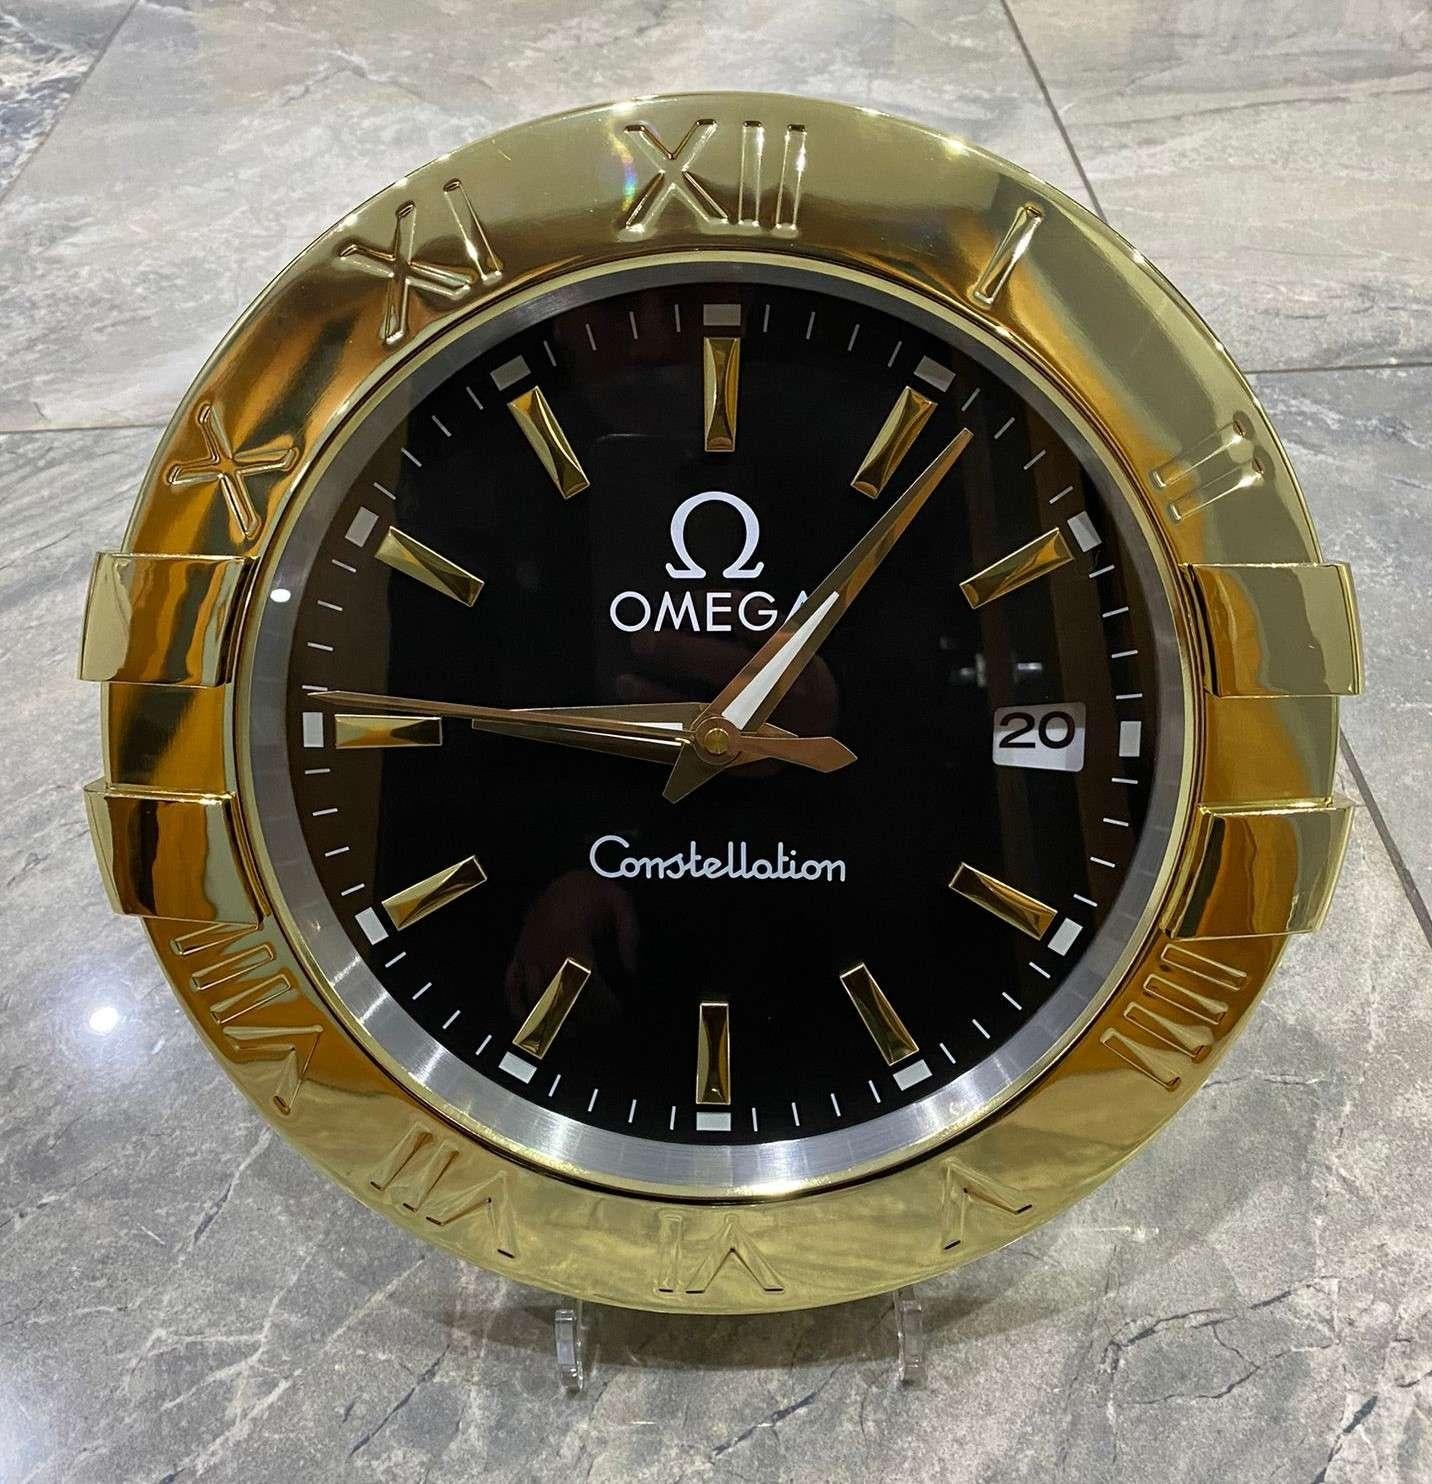 Omega Constellation Officially Certified Black & Gold Wall Clock. With luminous hands, sweeping hands.
Free international shipping.